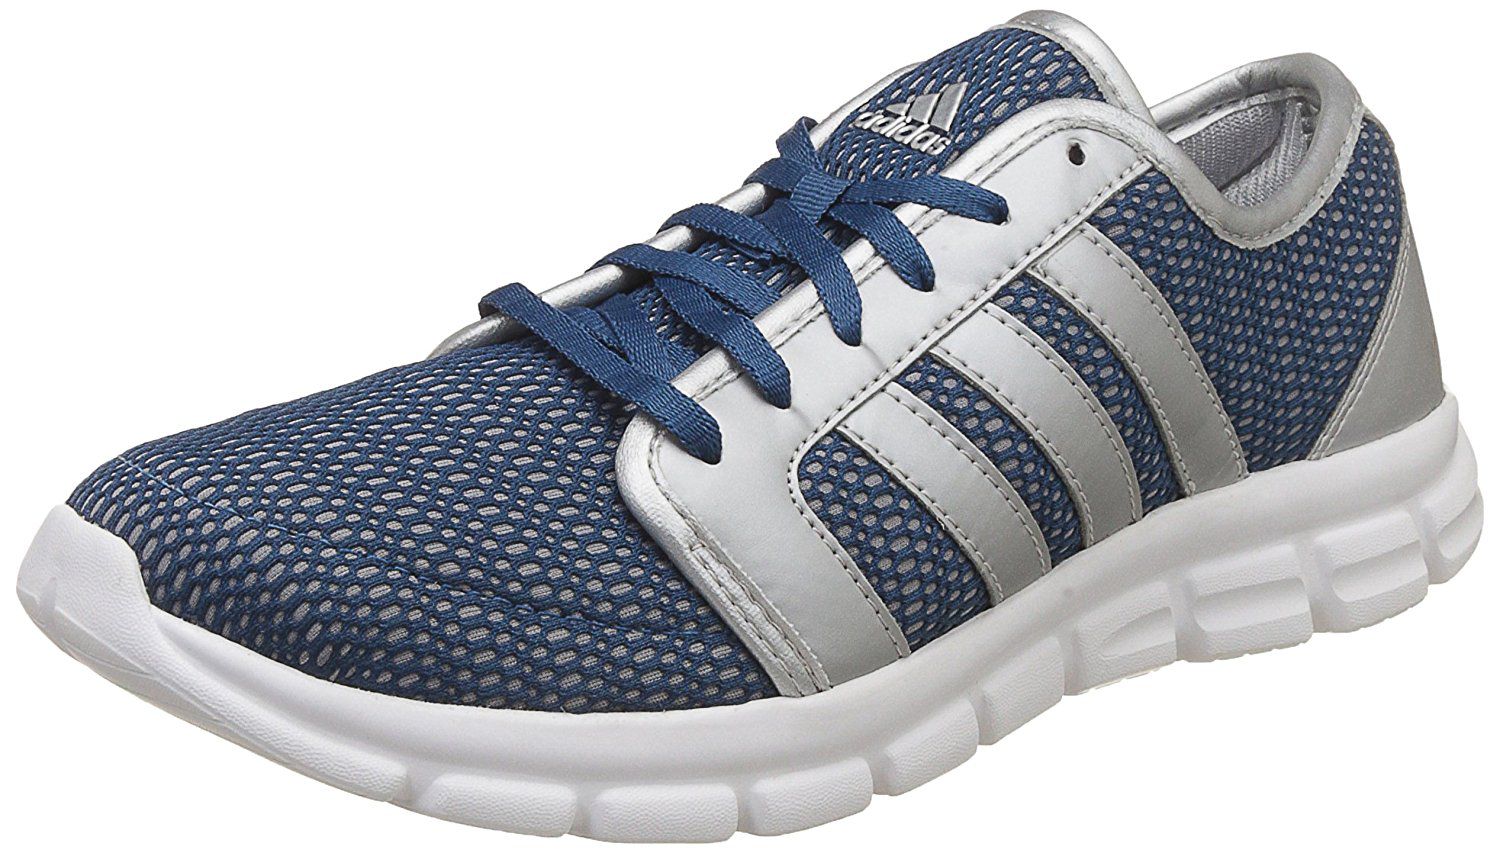 Adidas Marlin 6.0 Silvmt Blue Running Shoes - Buy Adidas Marlin 6.0 Silvmt  Blue Running Shoes Online at Best Prices in India on Snapdeal